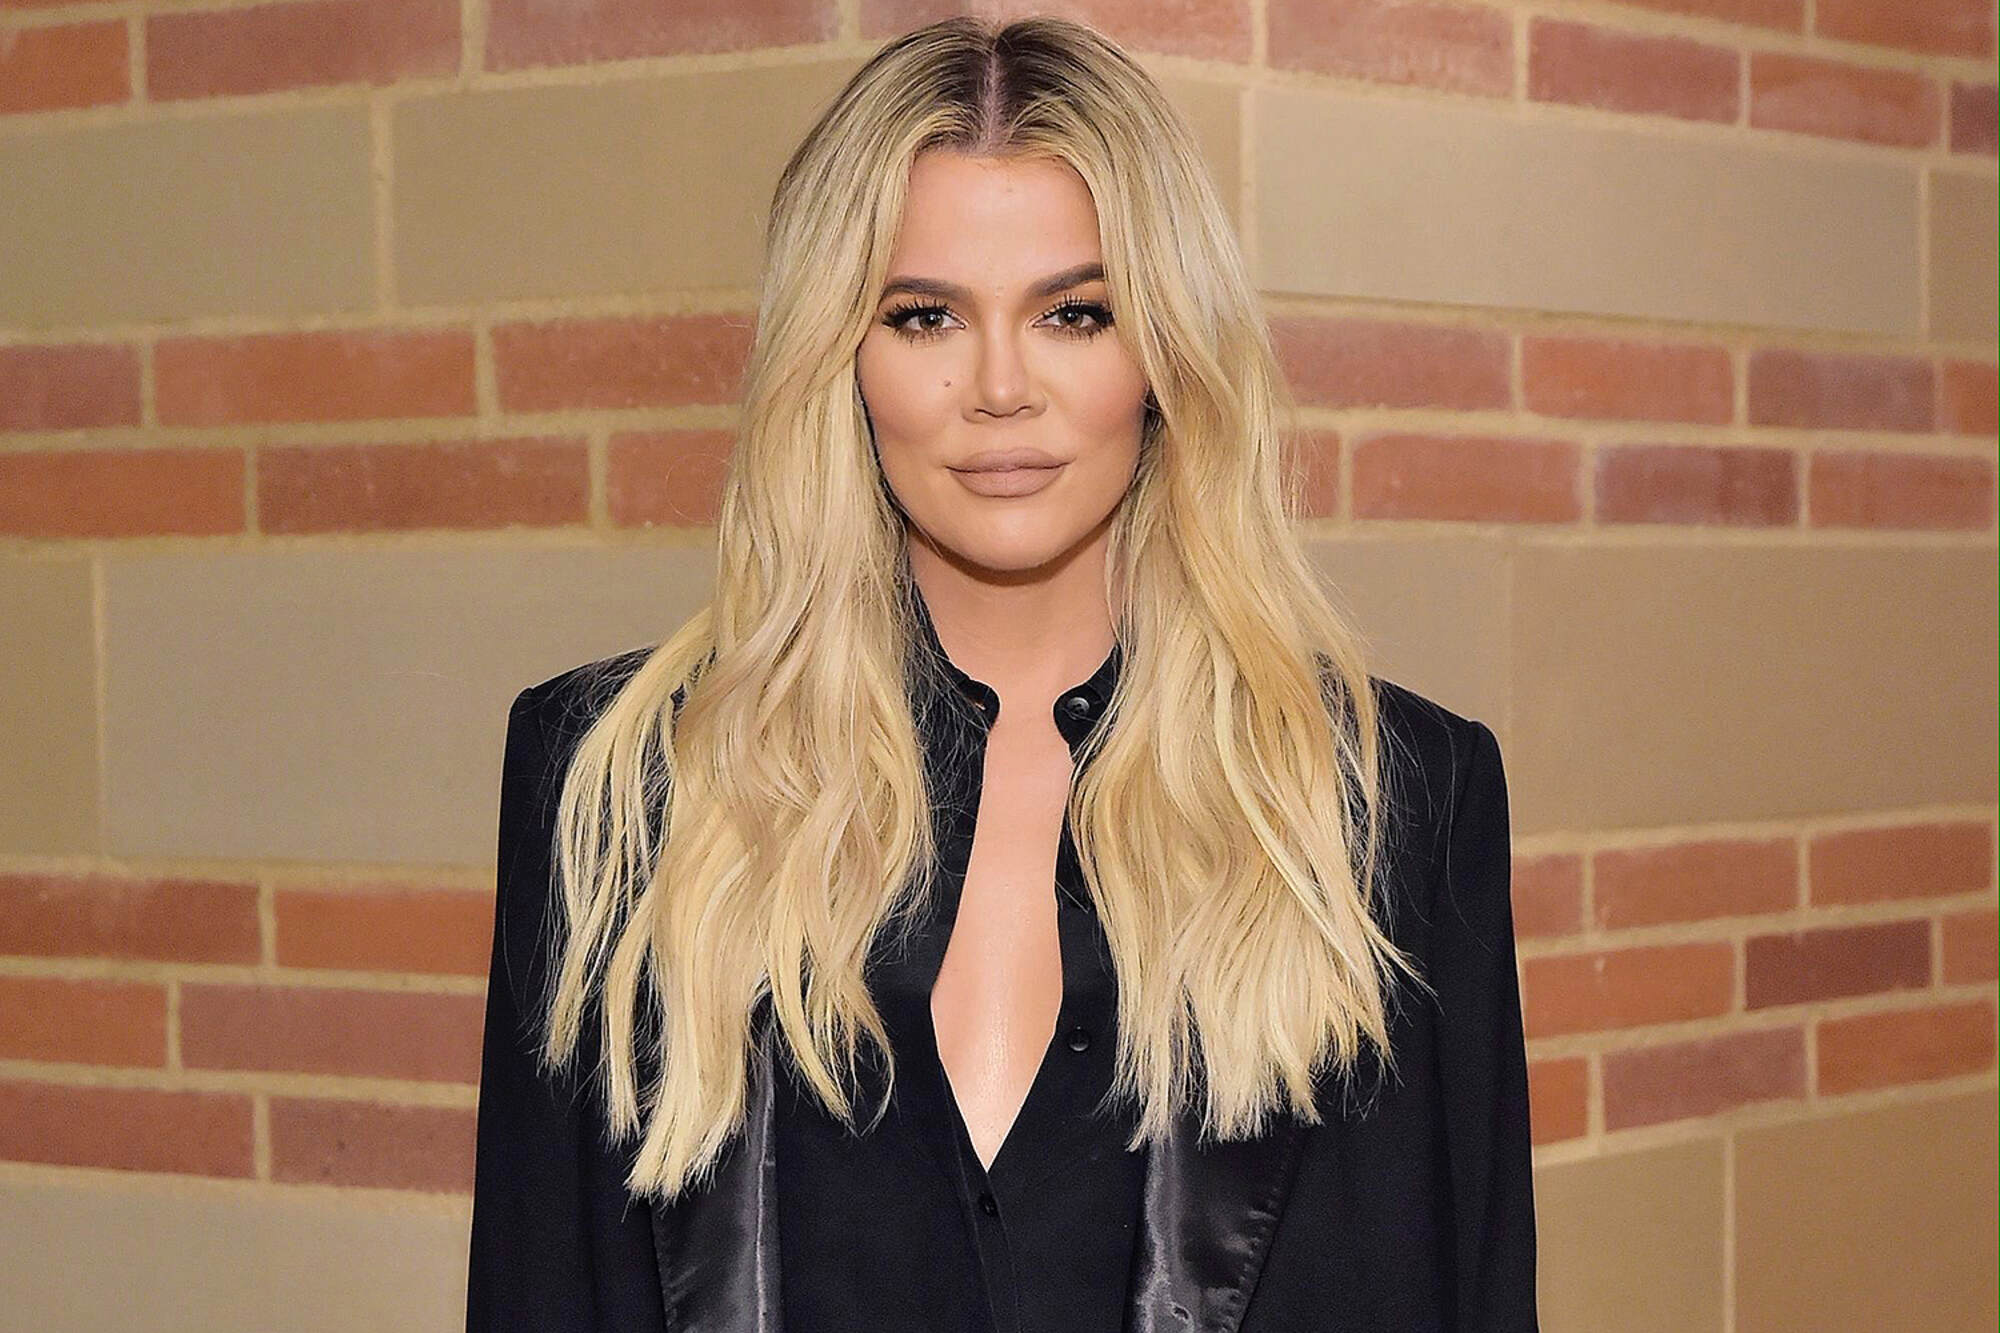 Is influencer Khloe Kardashian using her net worth to sue the